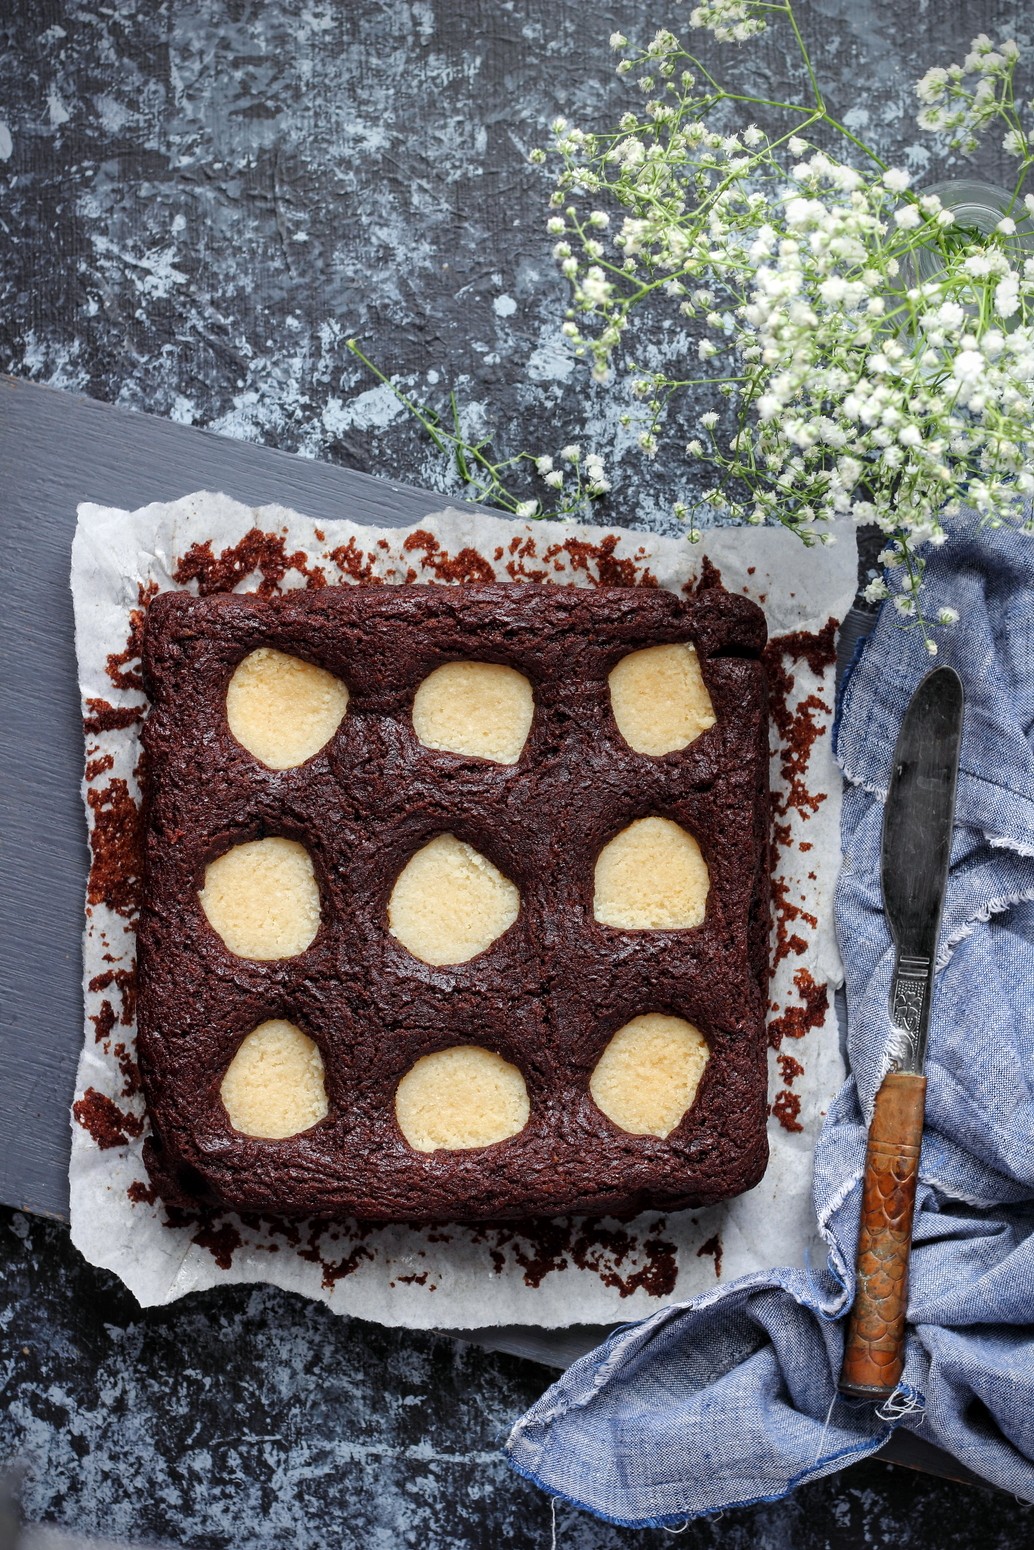 SATURN MIDNIGHT MOON CAKE – Eggfree Chocolate Cake with a Twist in Taste